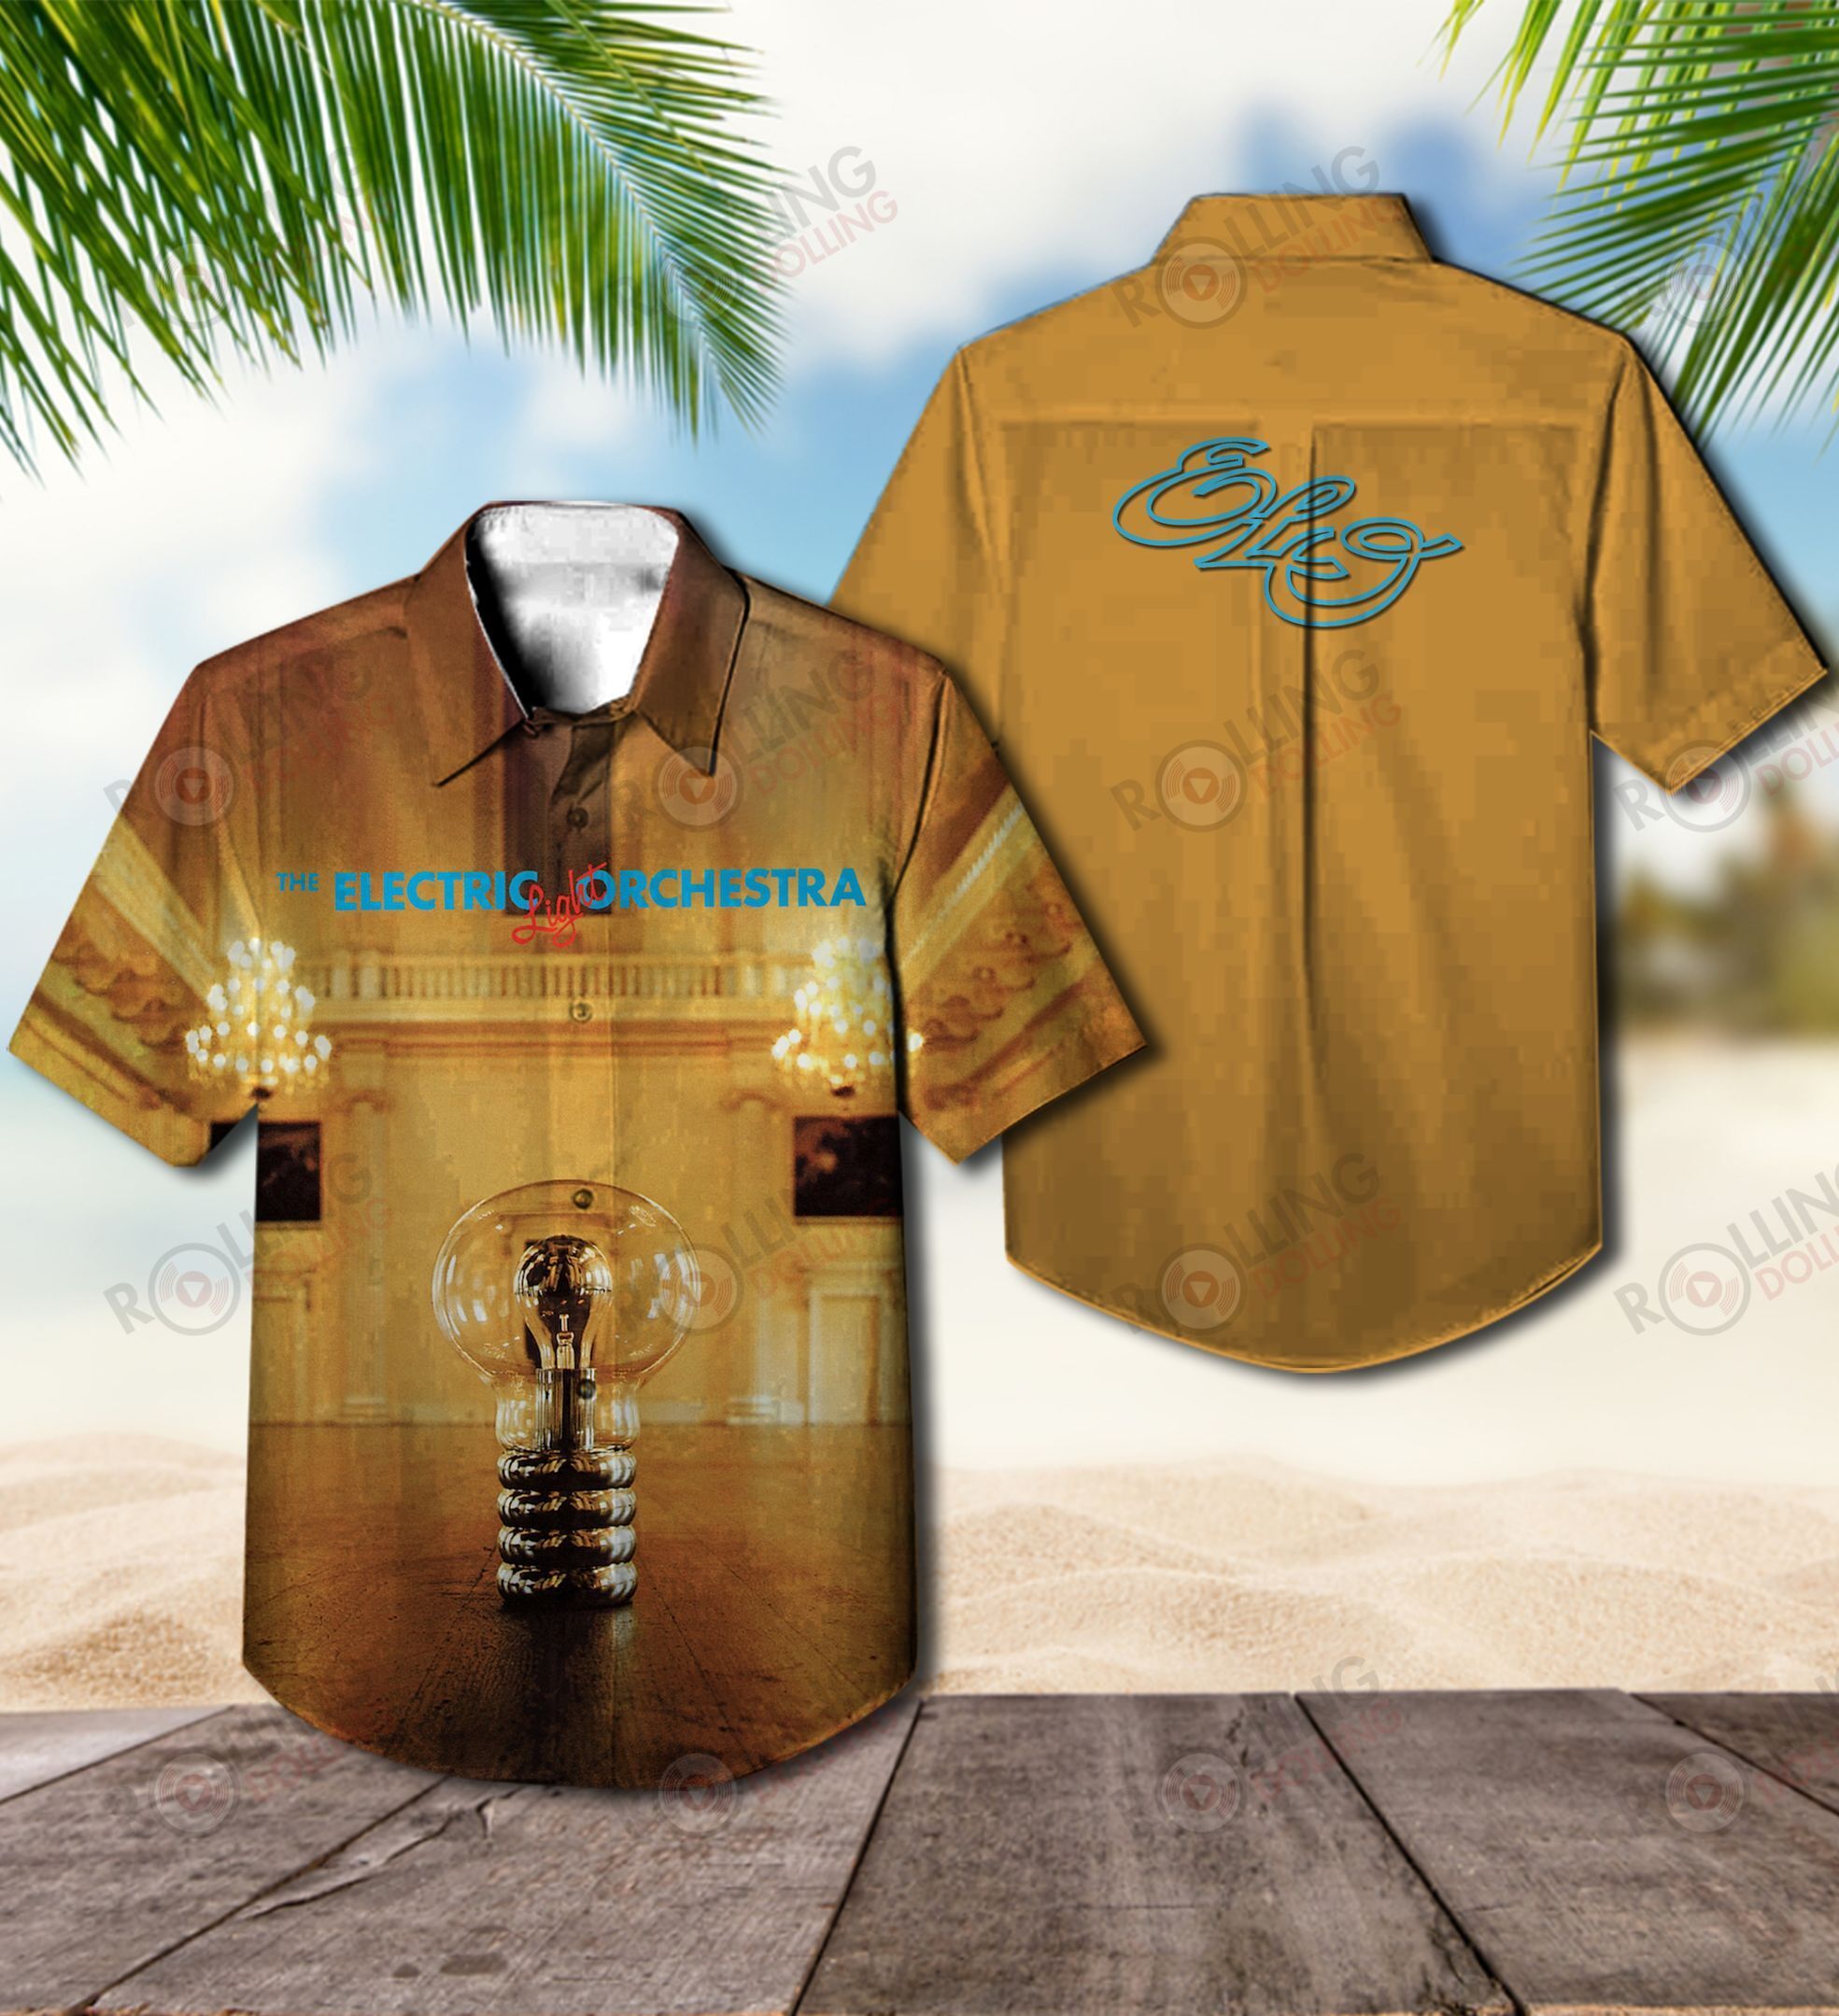 We have compiled a list of some of the best Hawaiian shirt that are available 251